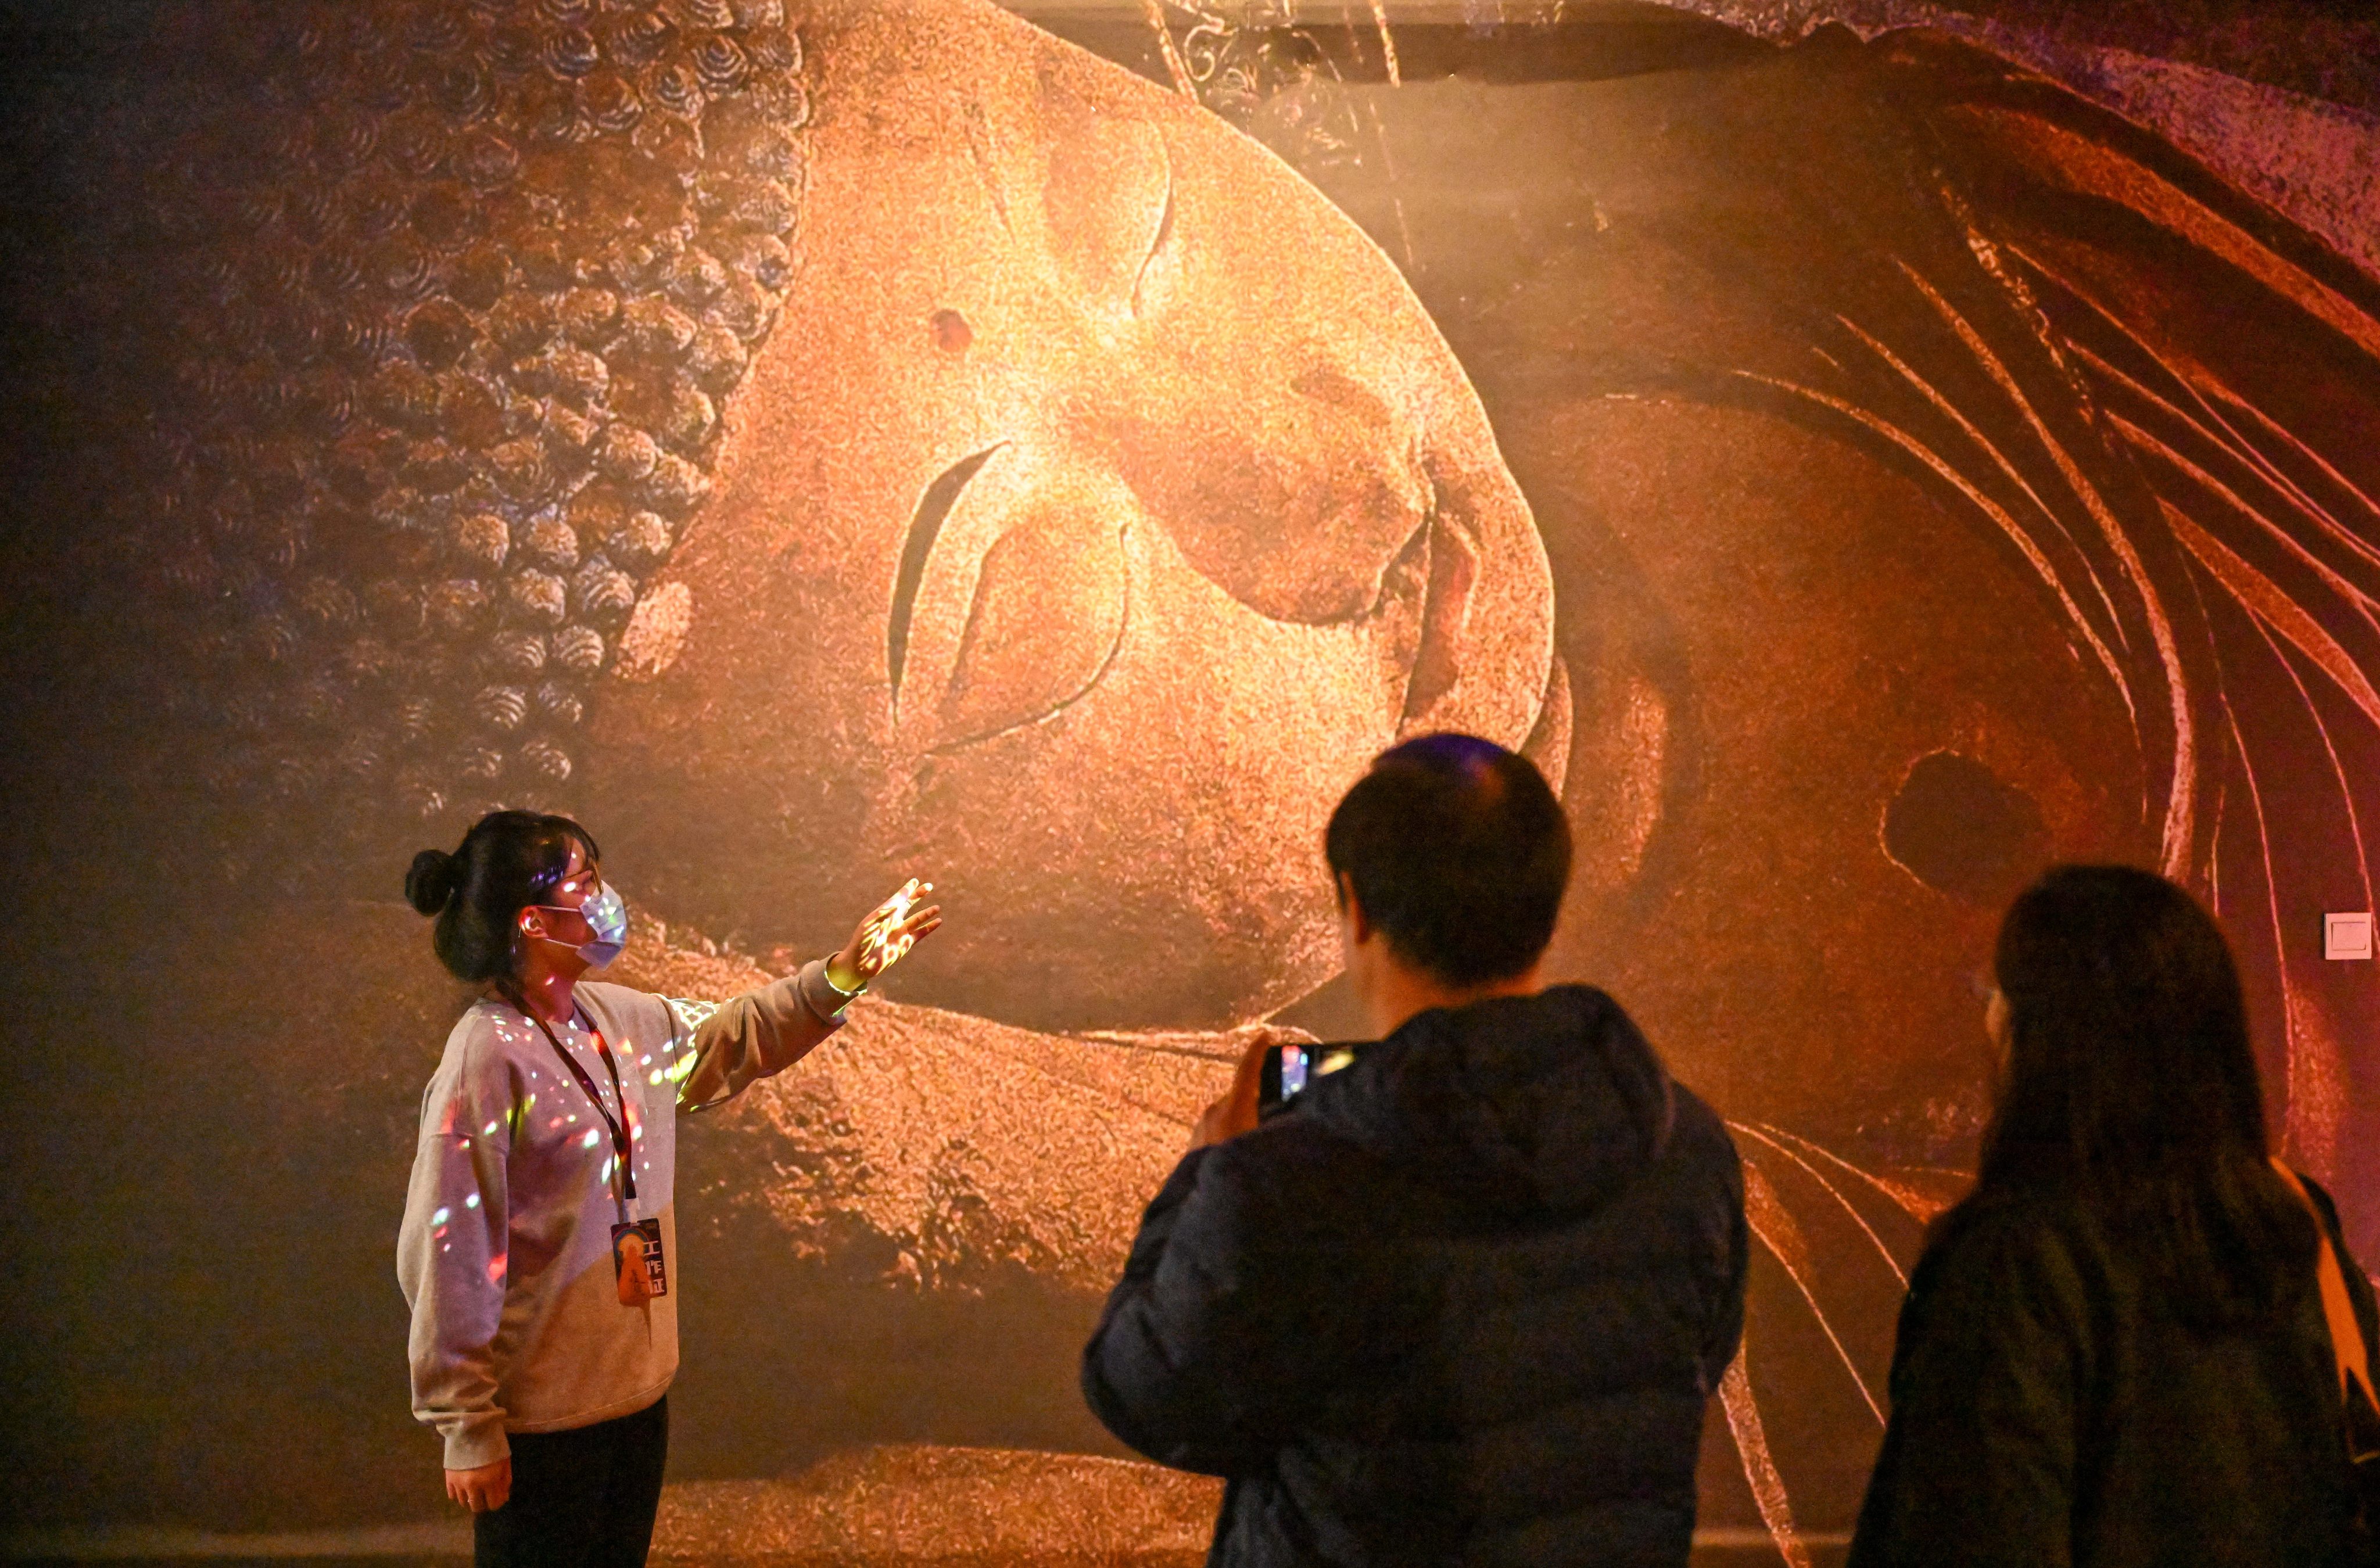 A guide introduces a work at an exhibition on Dunhuang culture at the Tianjin Digital Art Museum in Tianjin on November 28. In recent years, China has seen significant climate-related damage to its cultural heritage sites, including the Dunhuang caves. Photo: Xinhua 